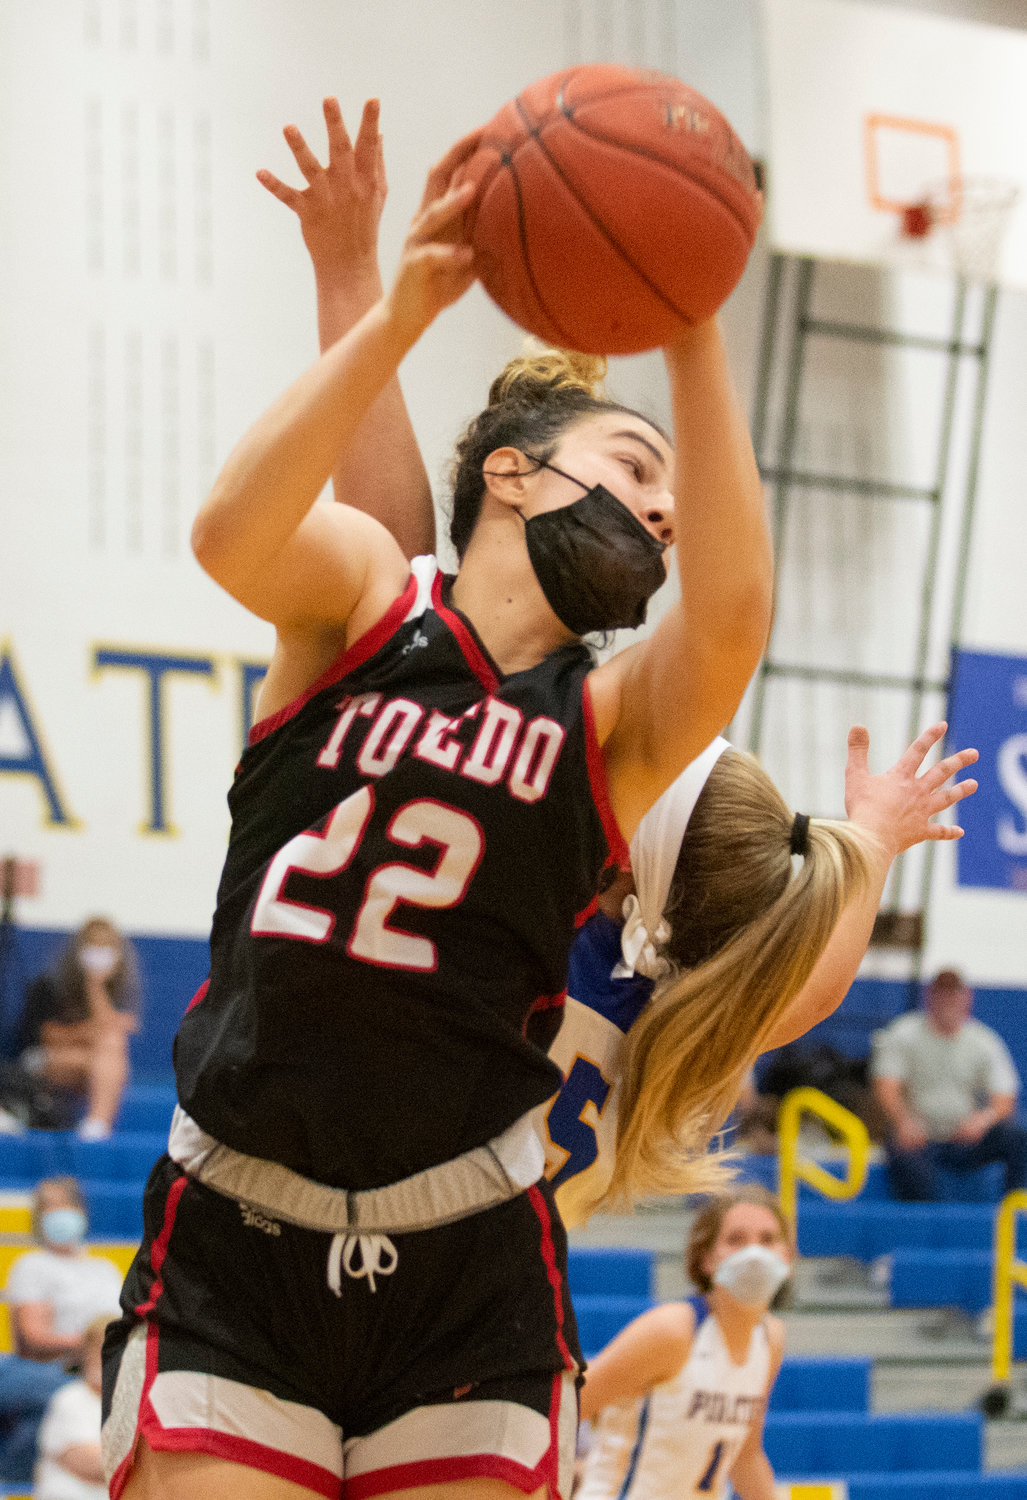 Toledo sophomore Abbie Marcil (22) pulls down an offensive rebound against Adna on Thursday.